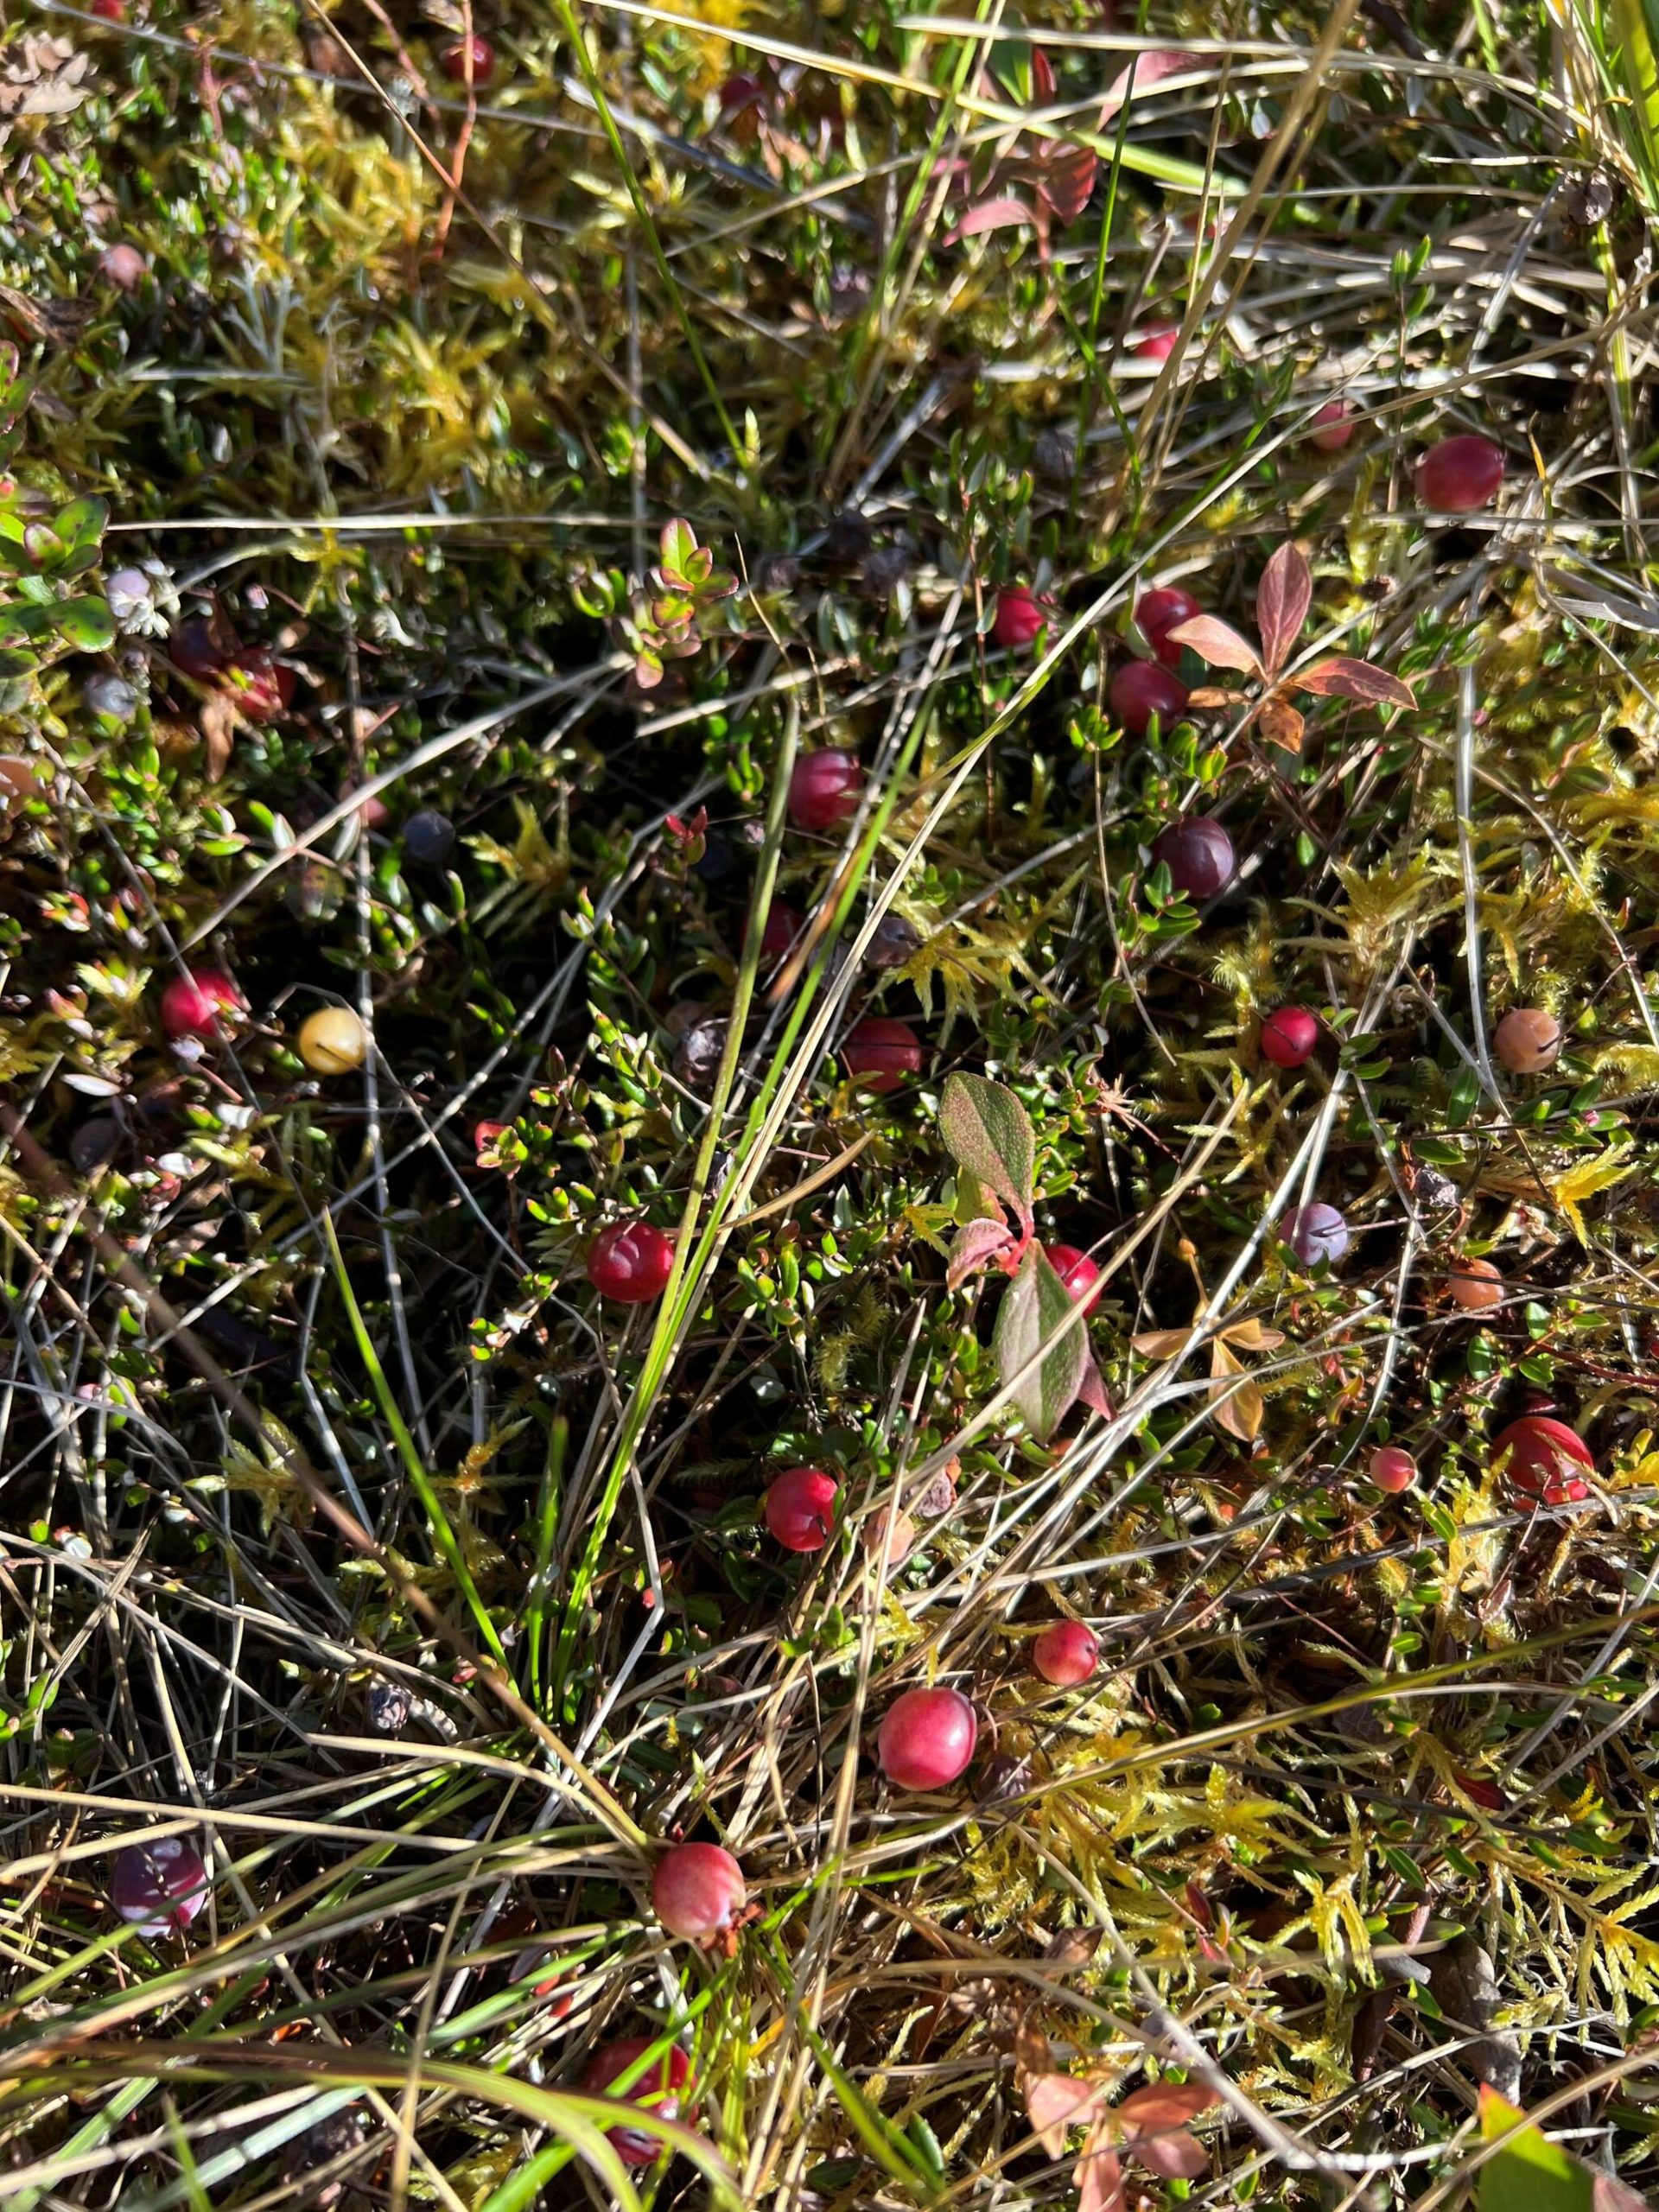 This photo shows cranberries in the muskeg in Wrangell. (Vivian Faith Prescott / For the Capital City Weekly)